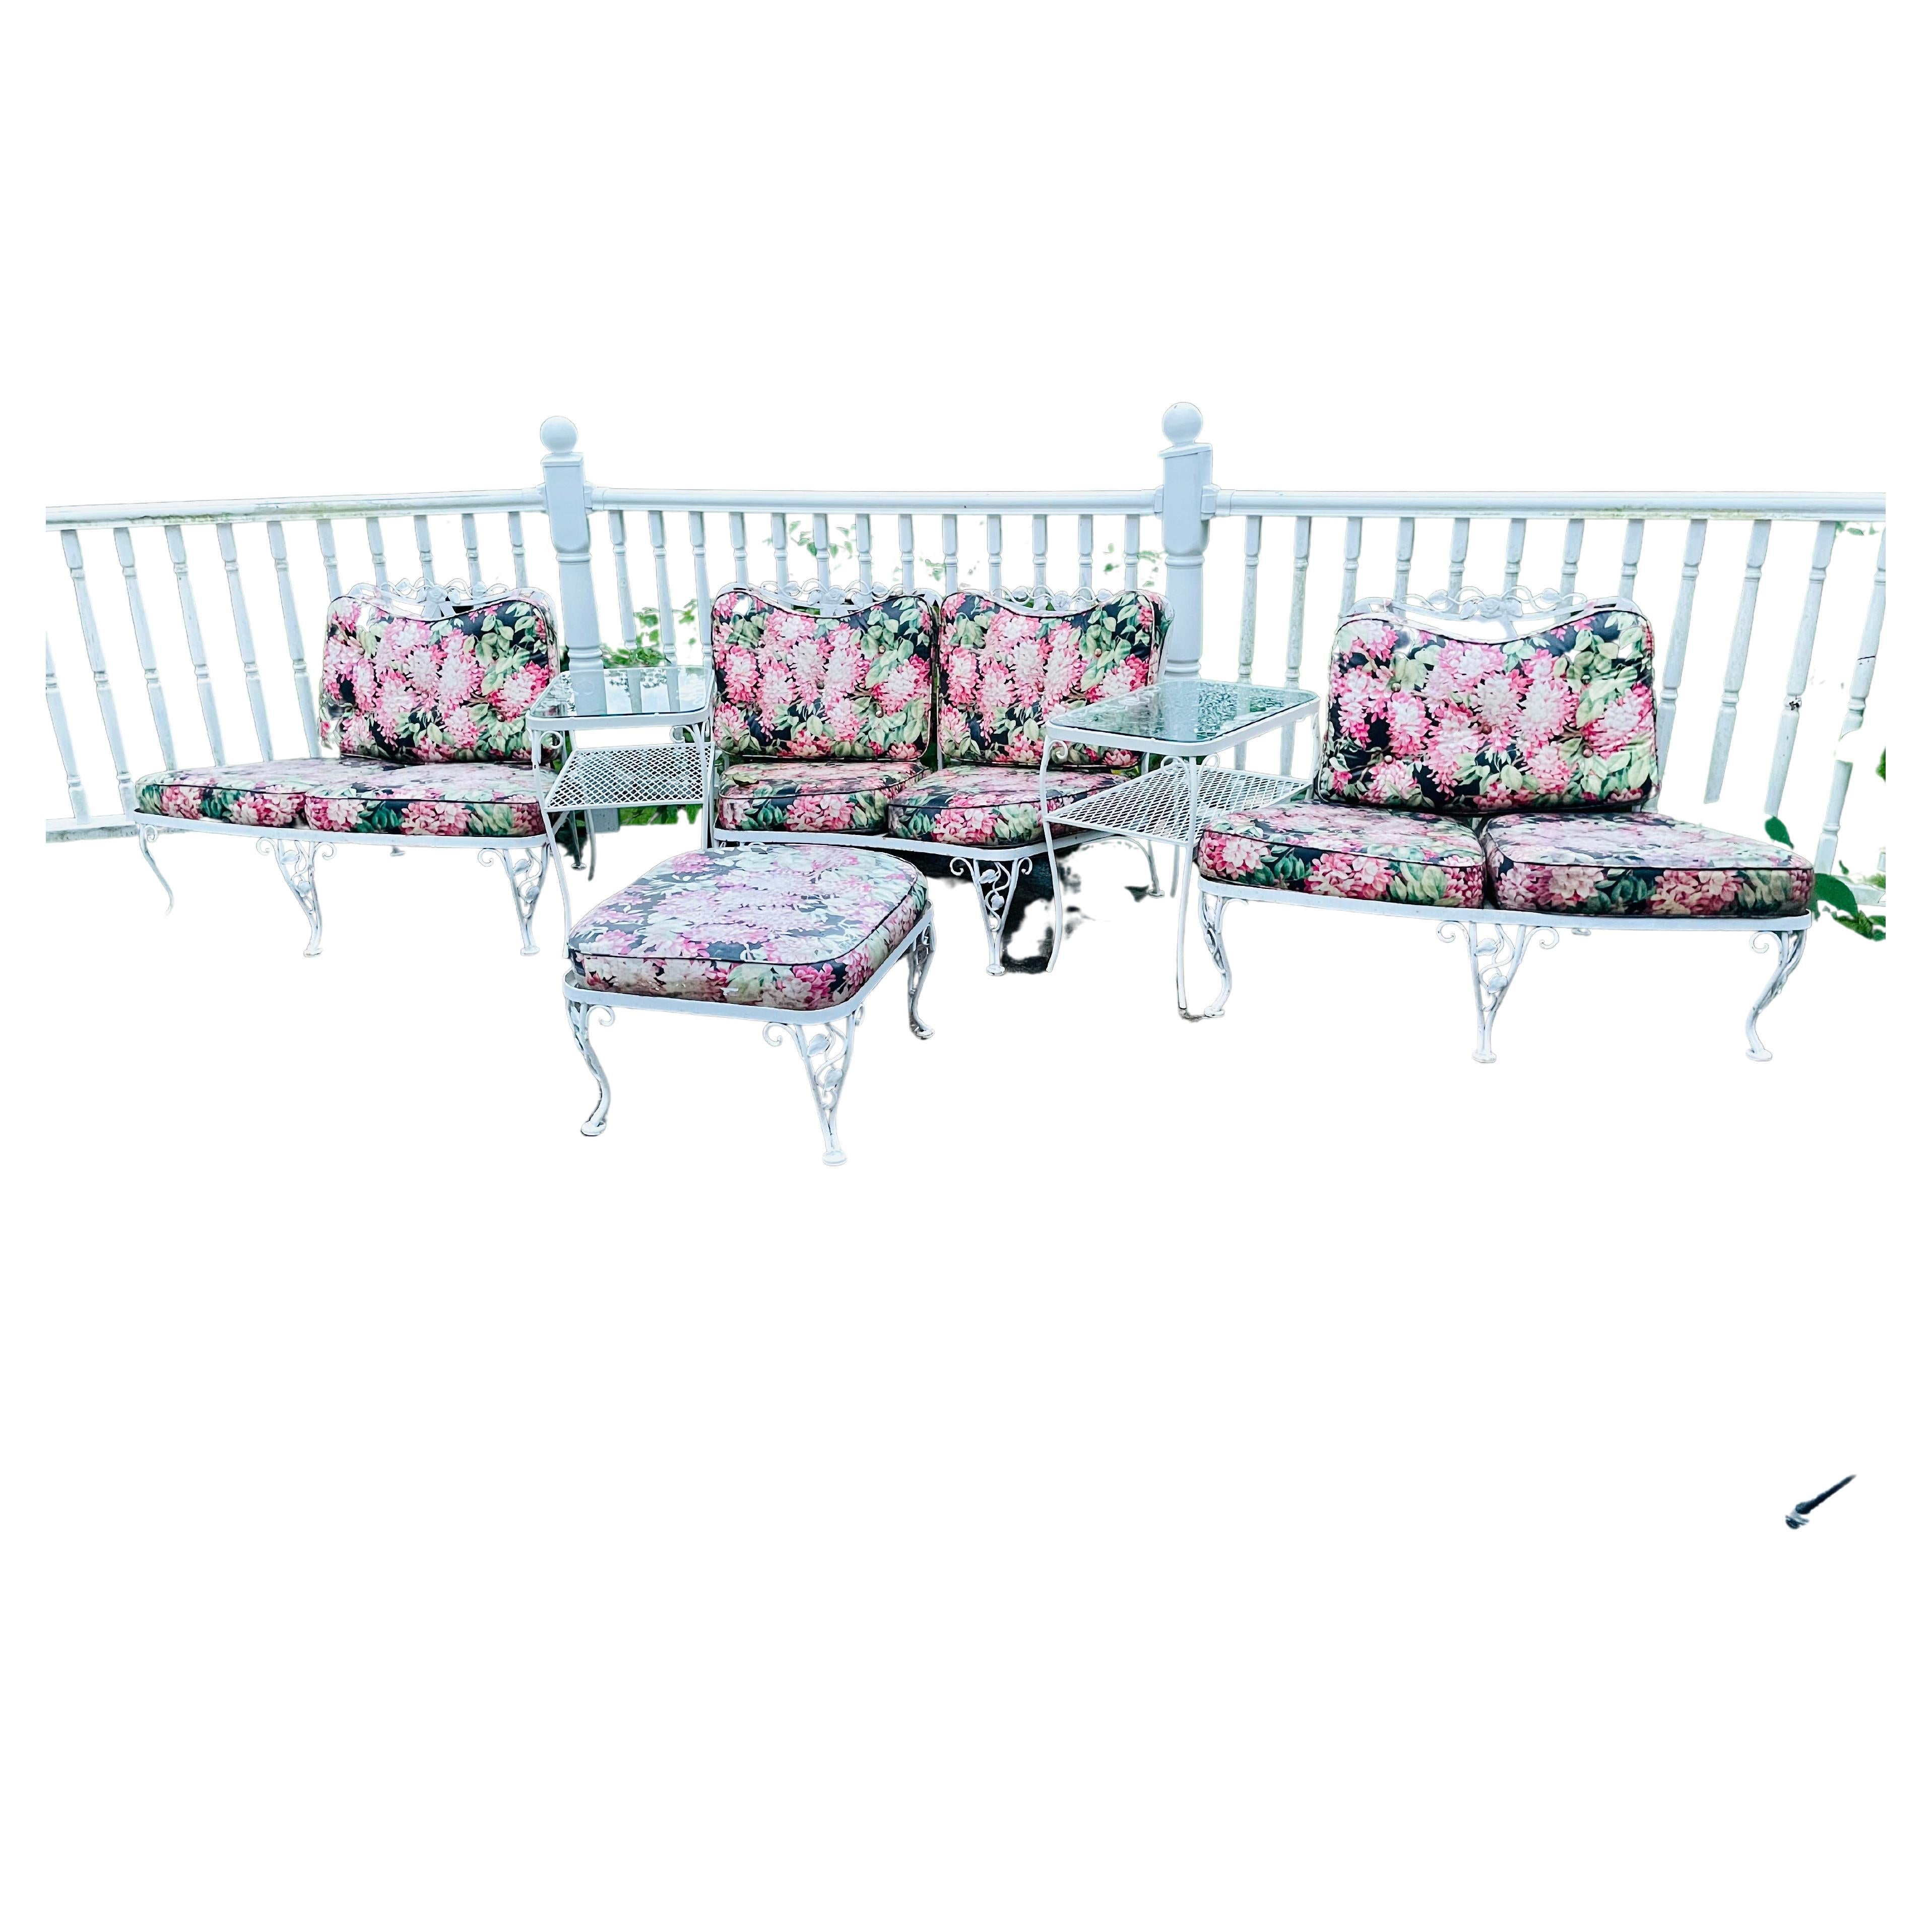 Special Edition Vintage Woodard Wrought Iron Chantilly Rose Sofa Sectional

It’s no wonder Woodard’s classic designs like this Chantilly Rose set is well known amongst the most affluent social strata of America. Its meticulous hand craftmanship and